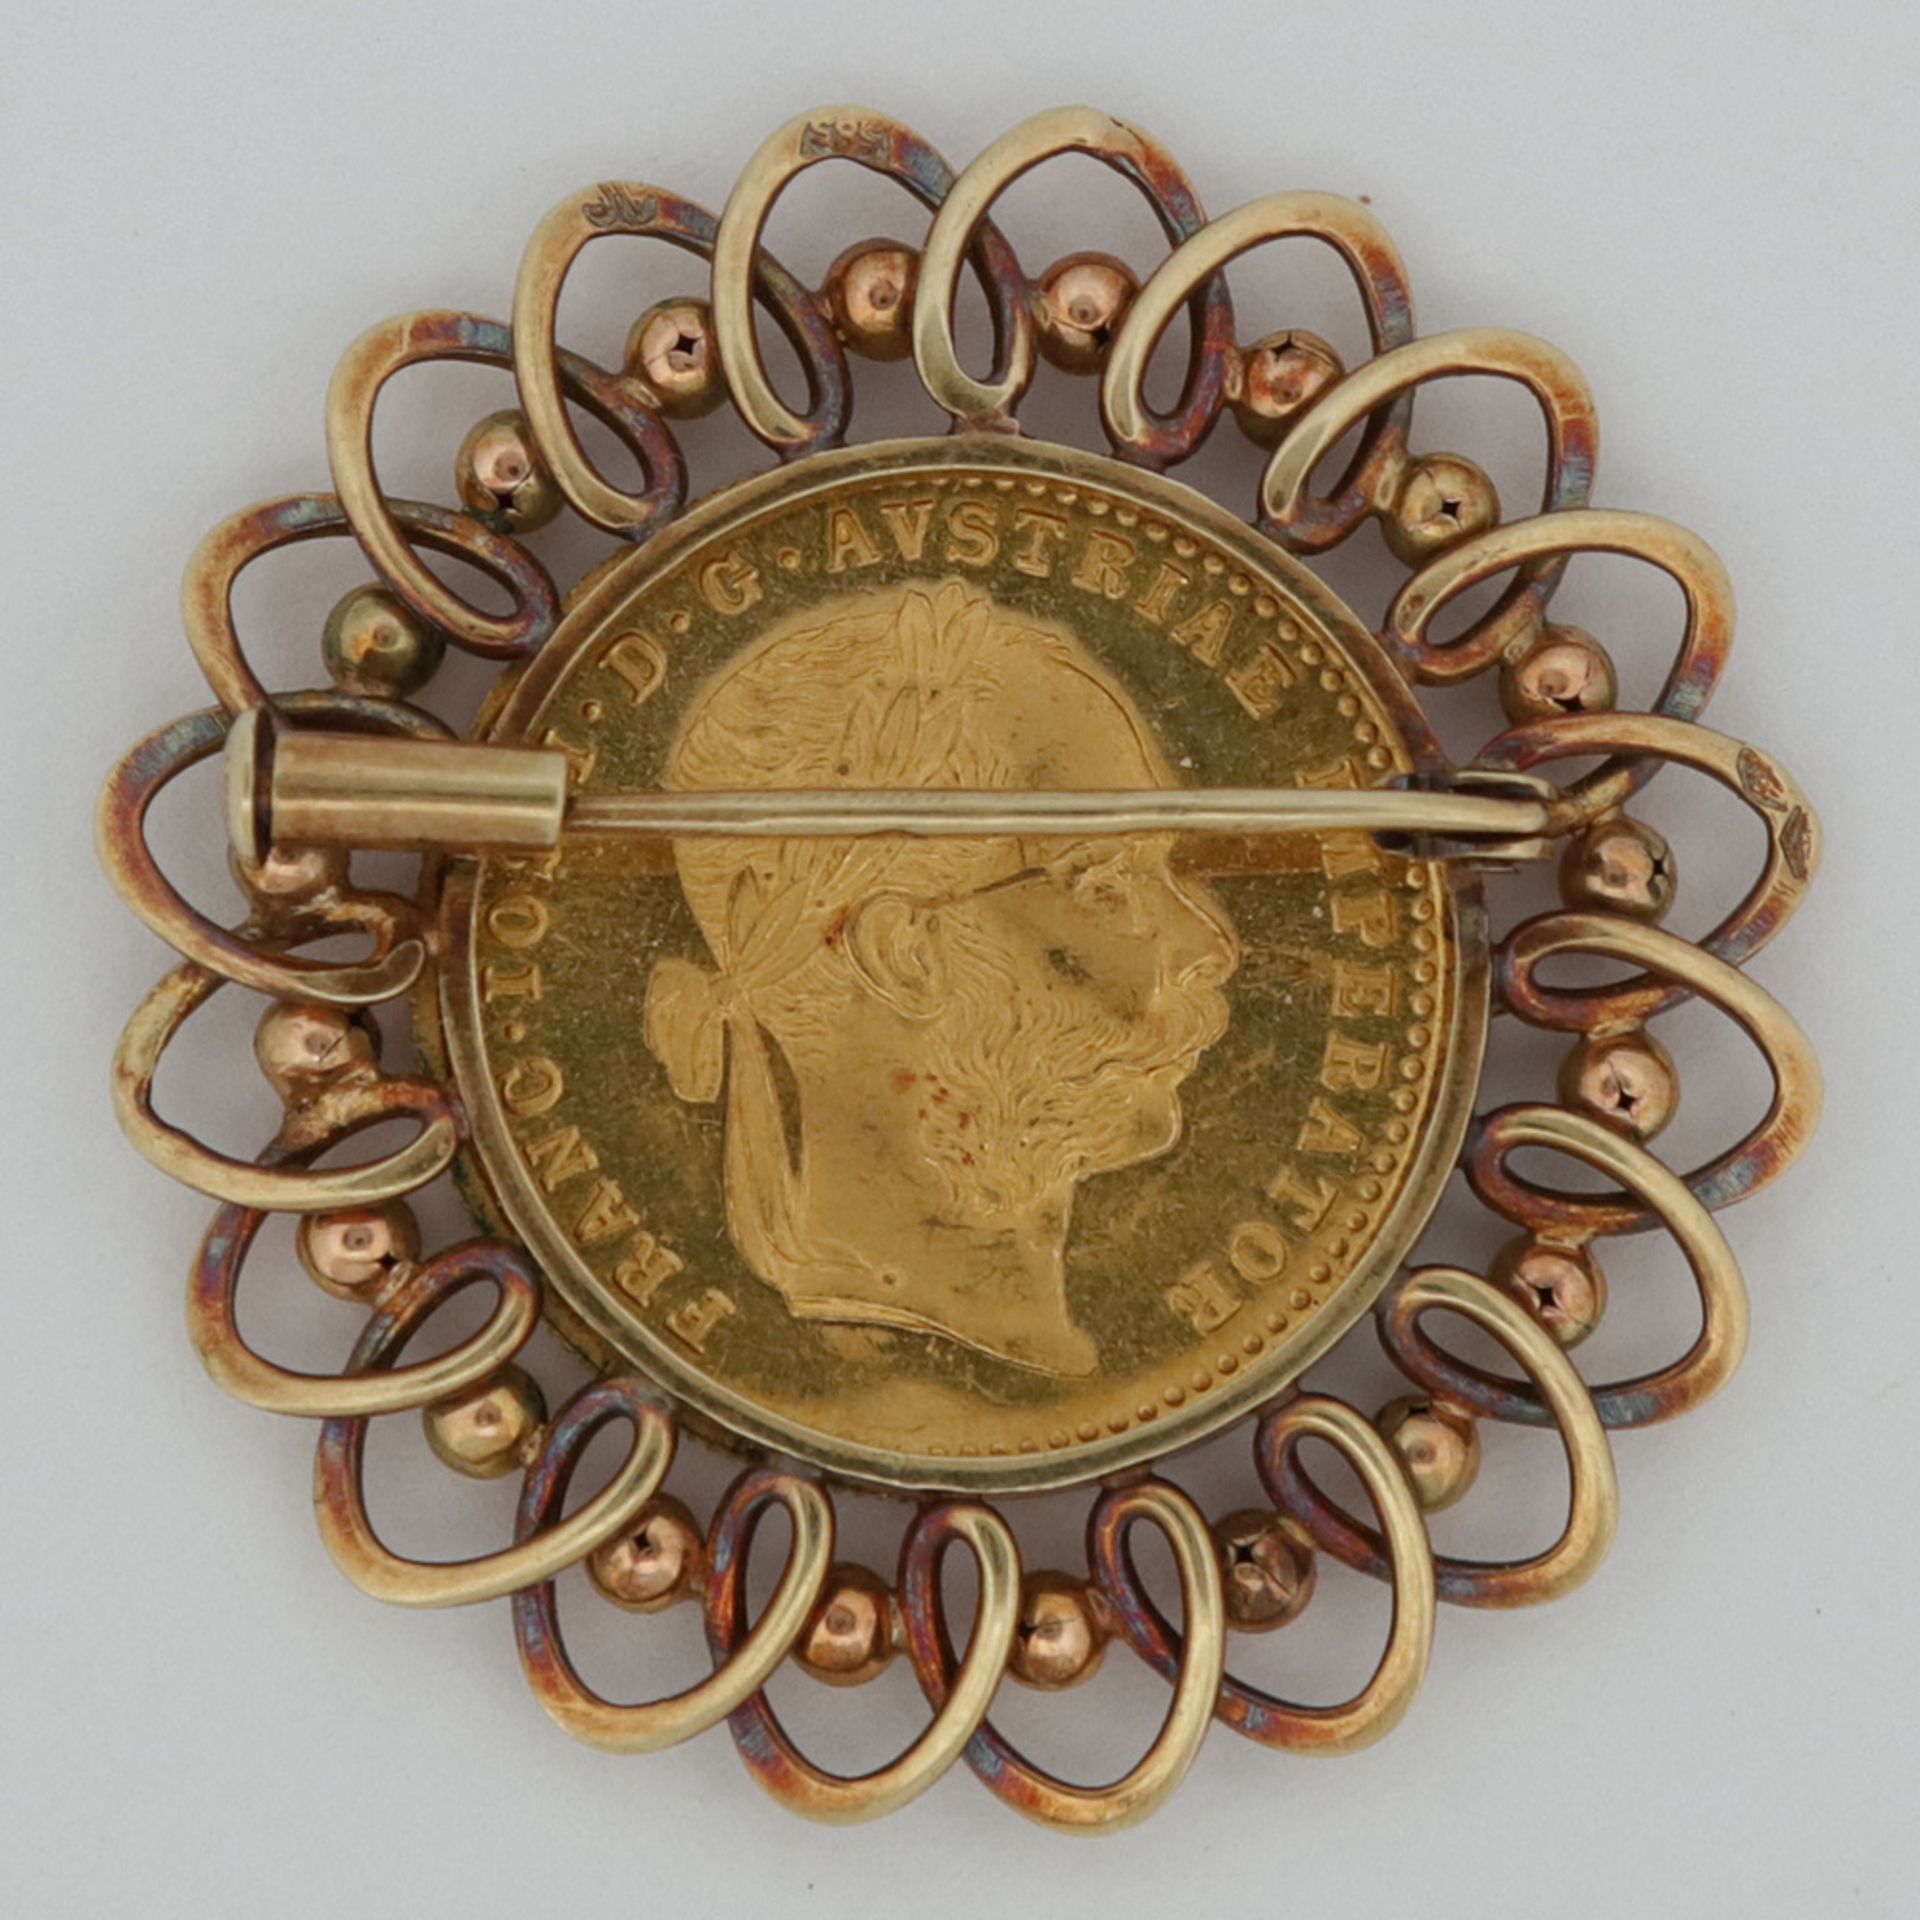 Brooch with 1 Dukaten gold coin - Image 2 of 2